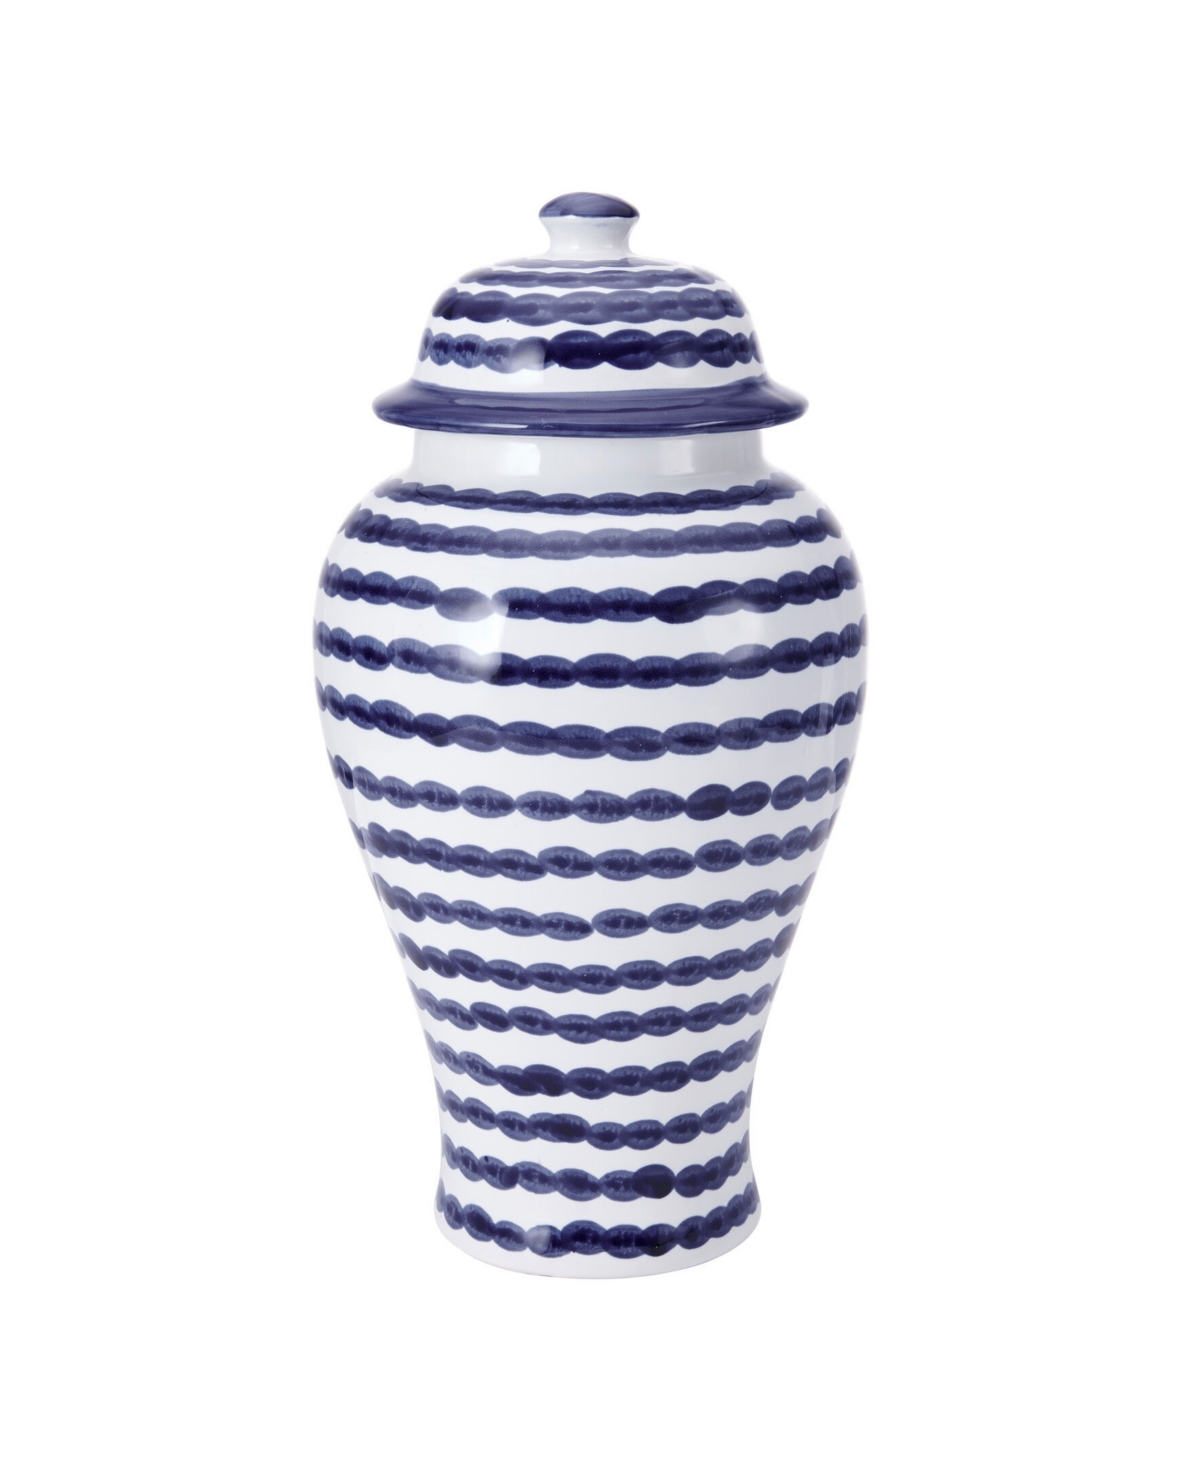 Mikasa Stripe Ceramic Canister With Lid In Multi Color